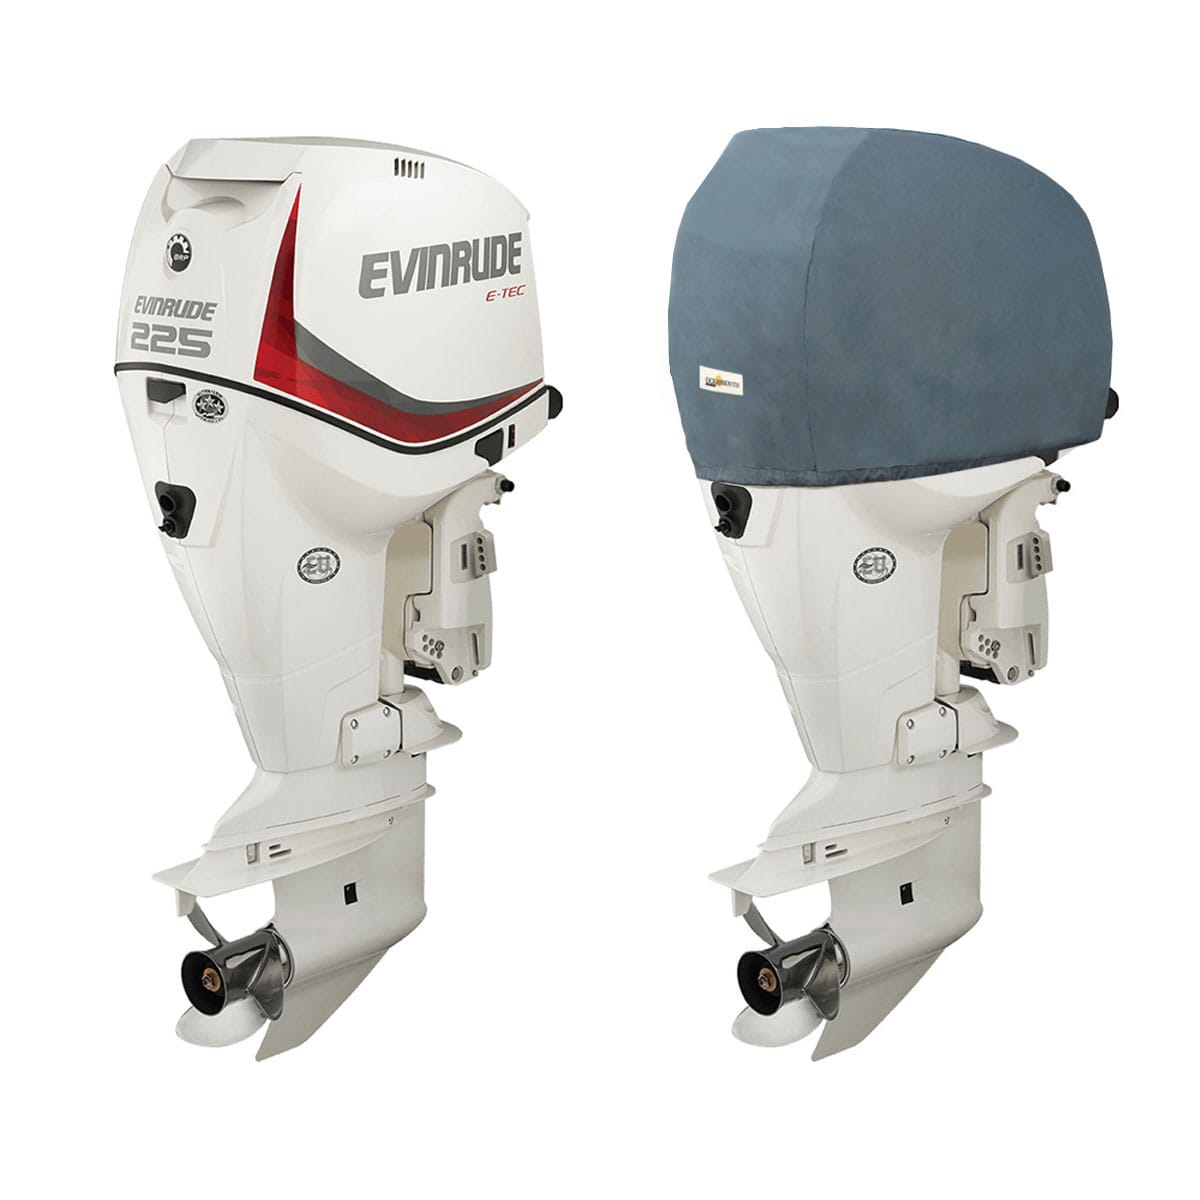 Cowling Covers for Evinrude